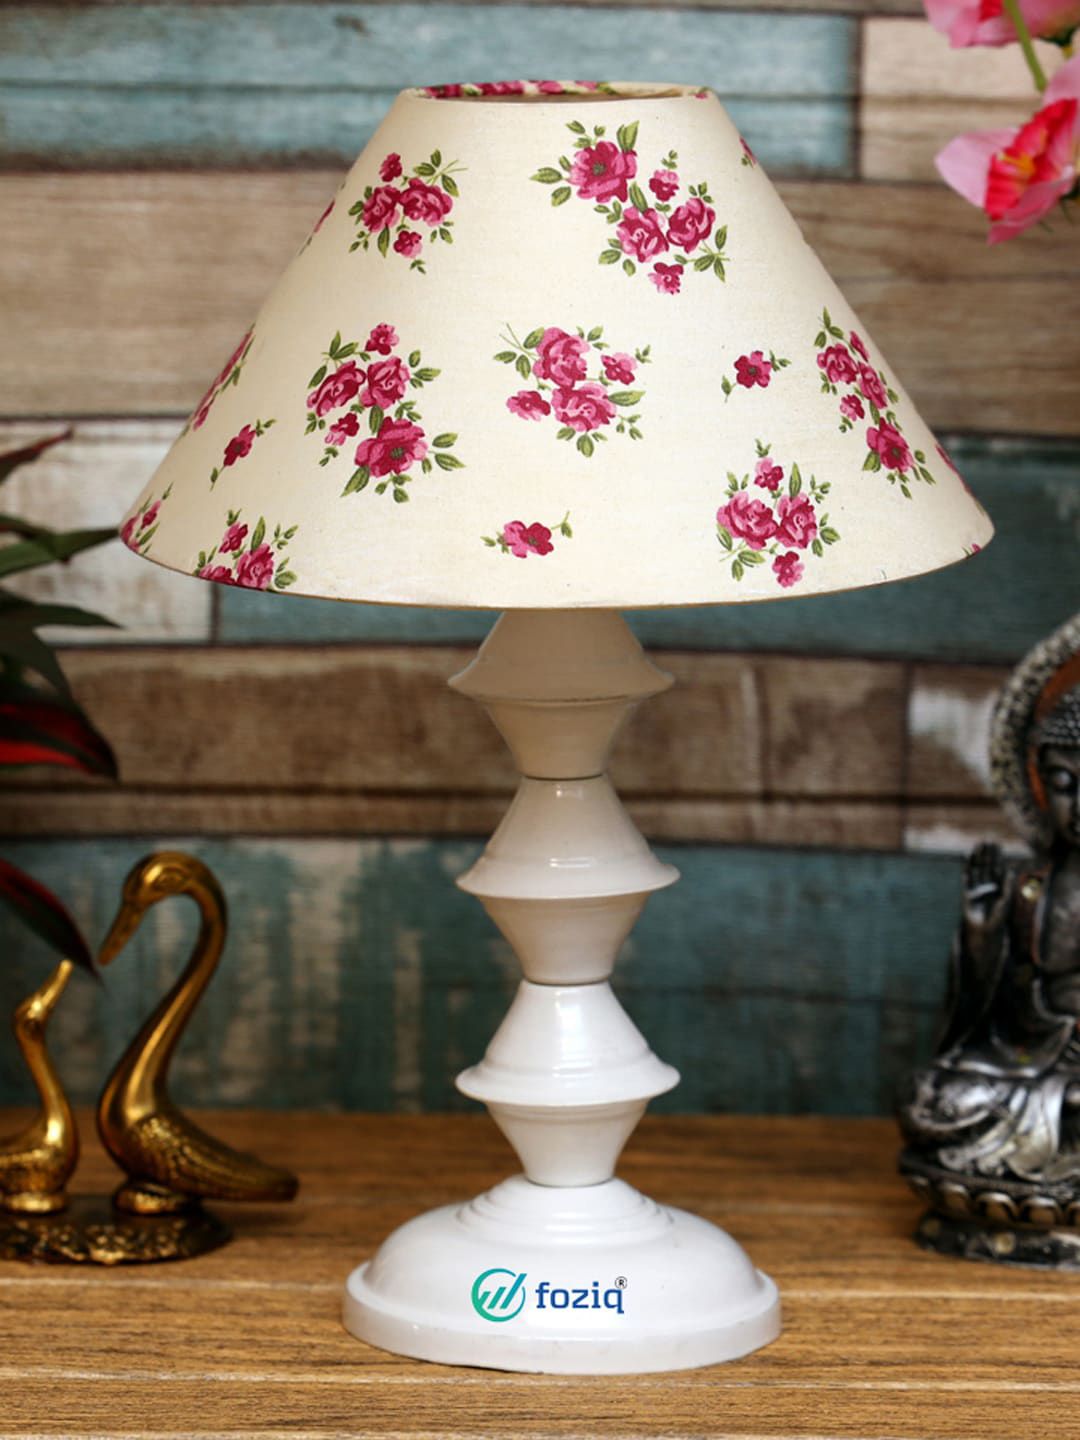 Foziq White & Pink Printed Country Table Lamp Price in India